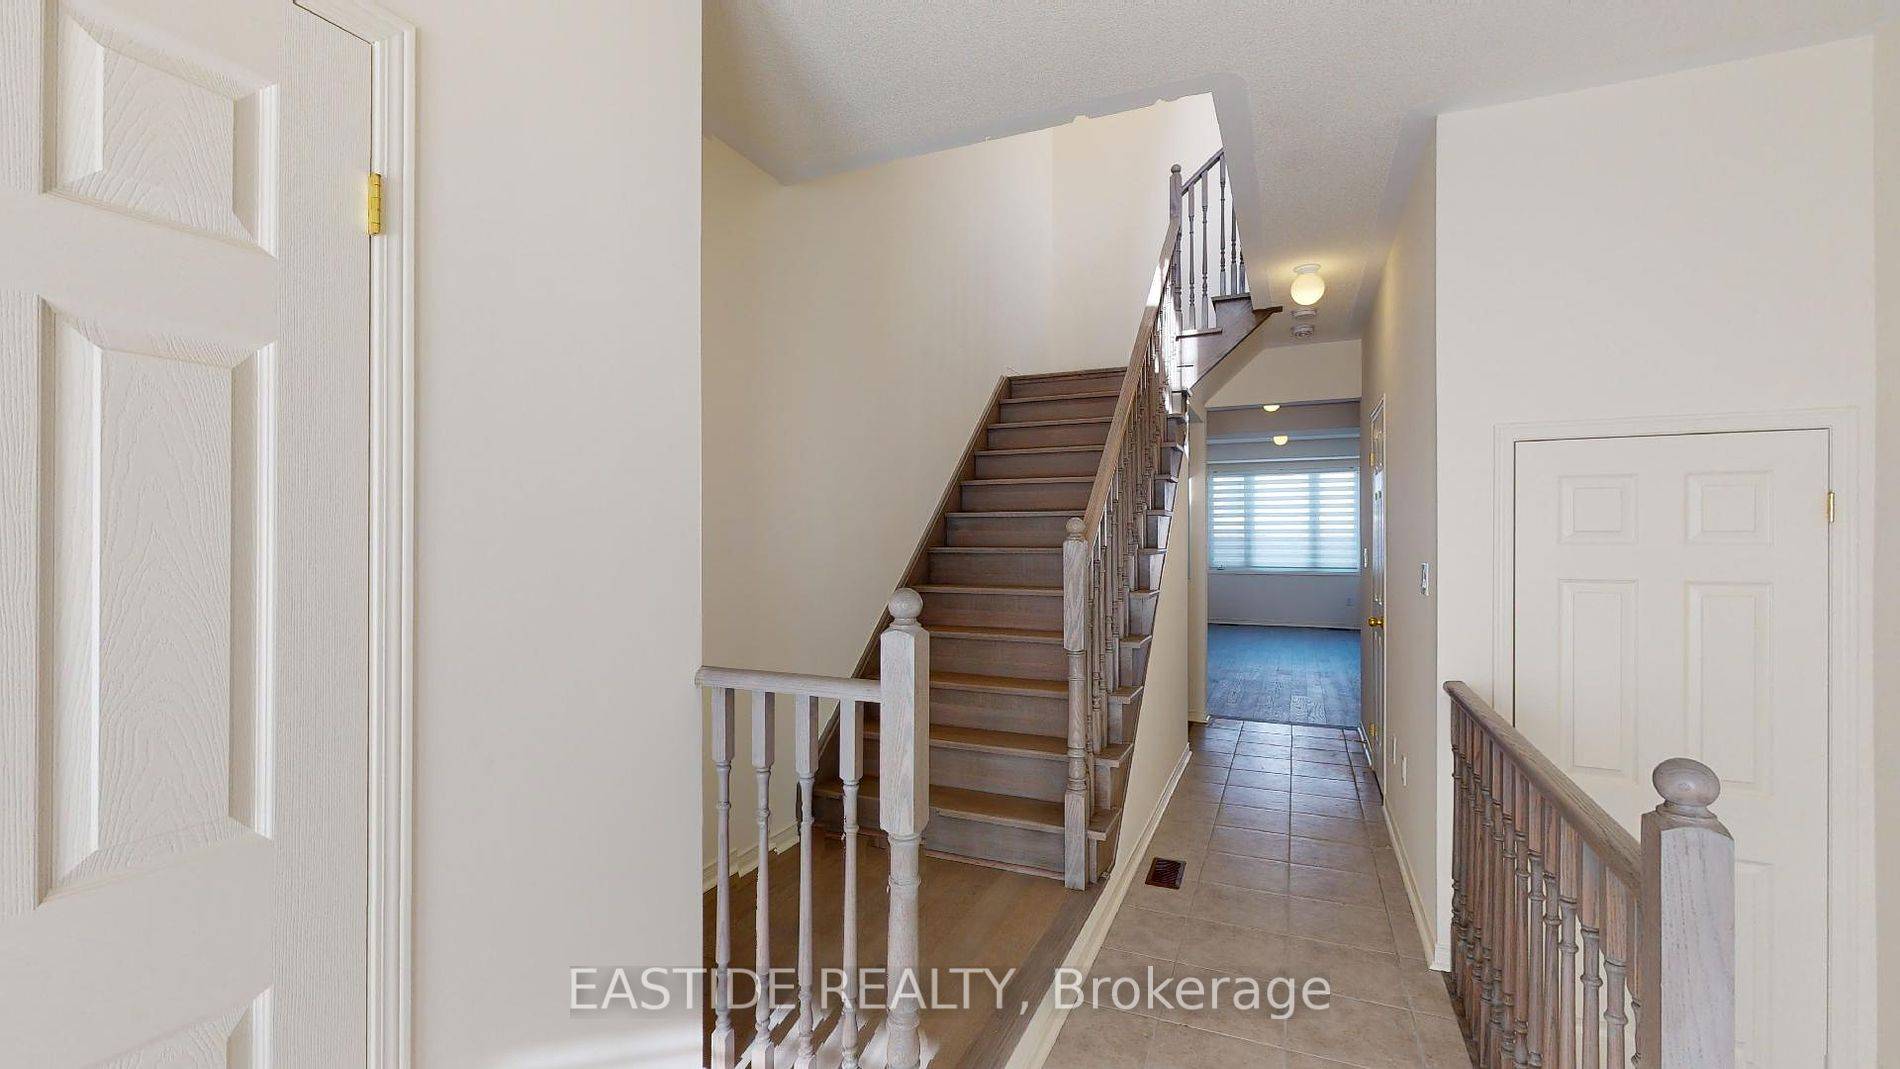 Bright And Spacious 3 Bedrooms, 4 Baths Freehold Townhouse In High Demand Area.